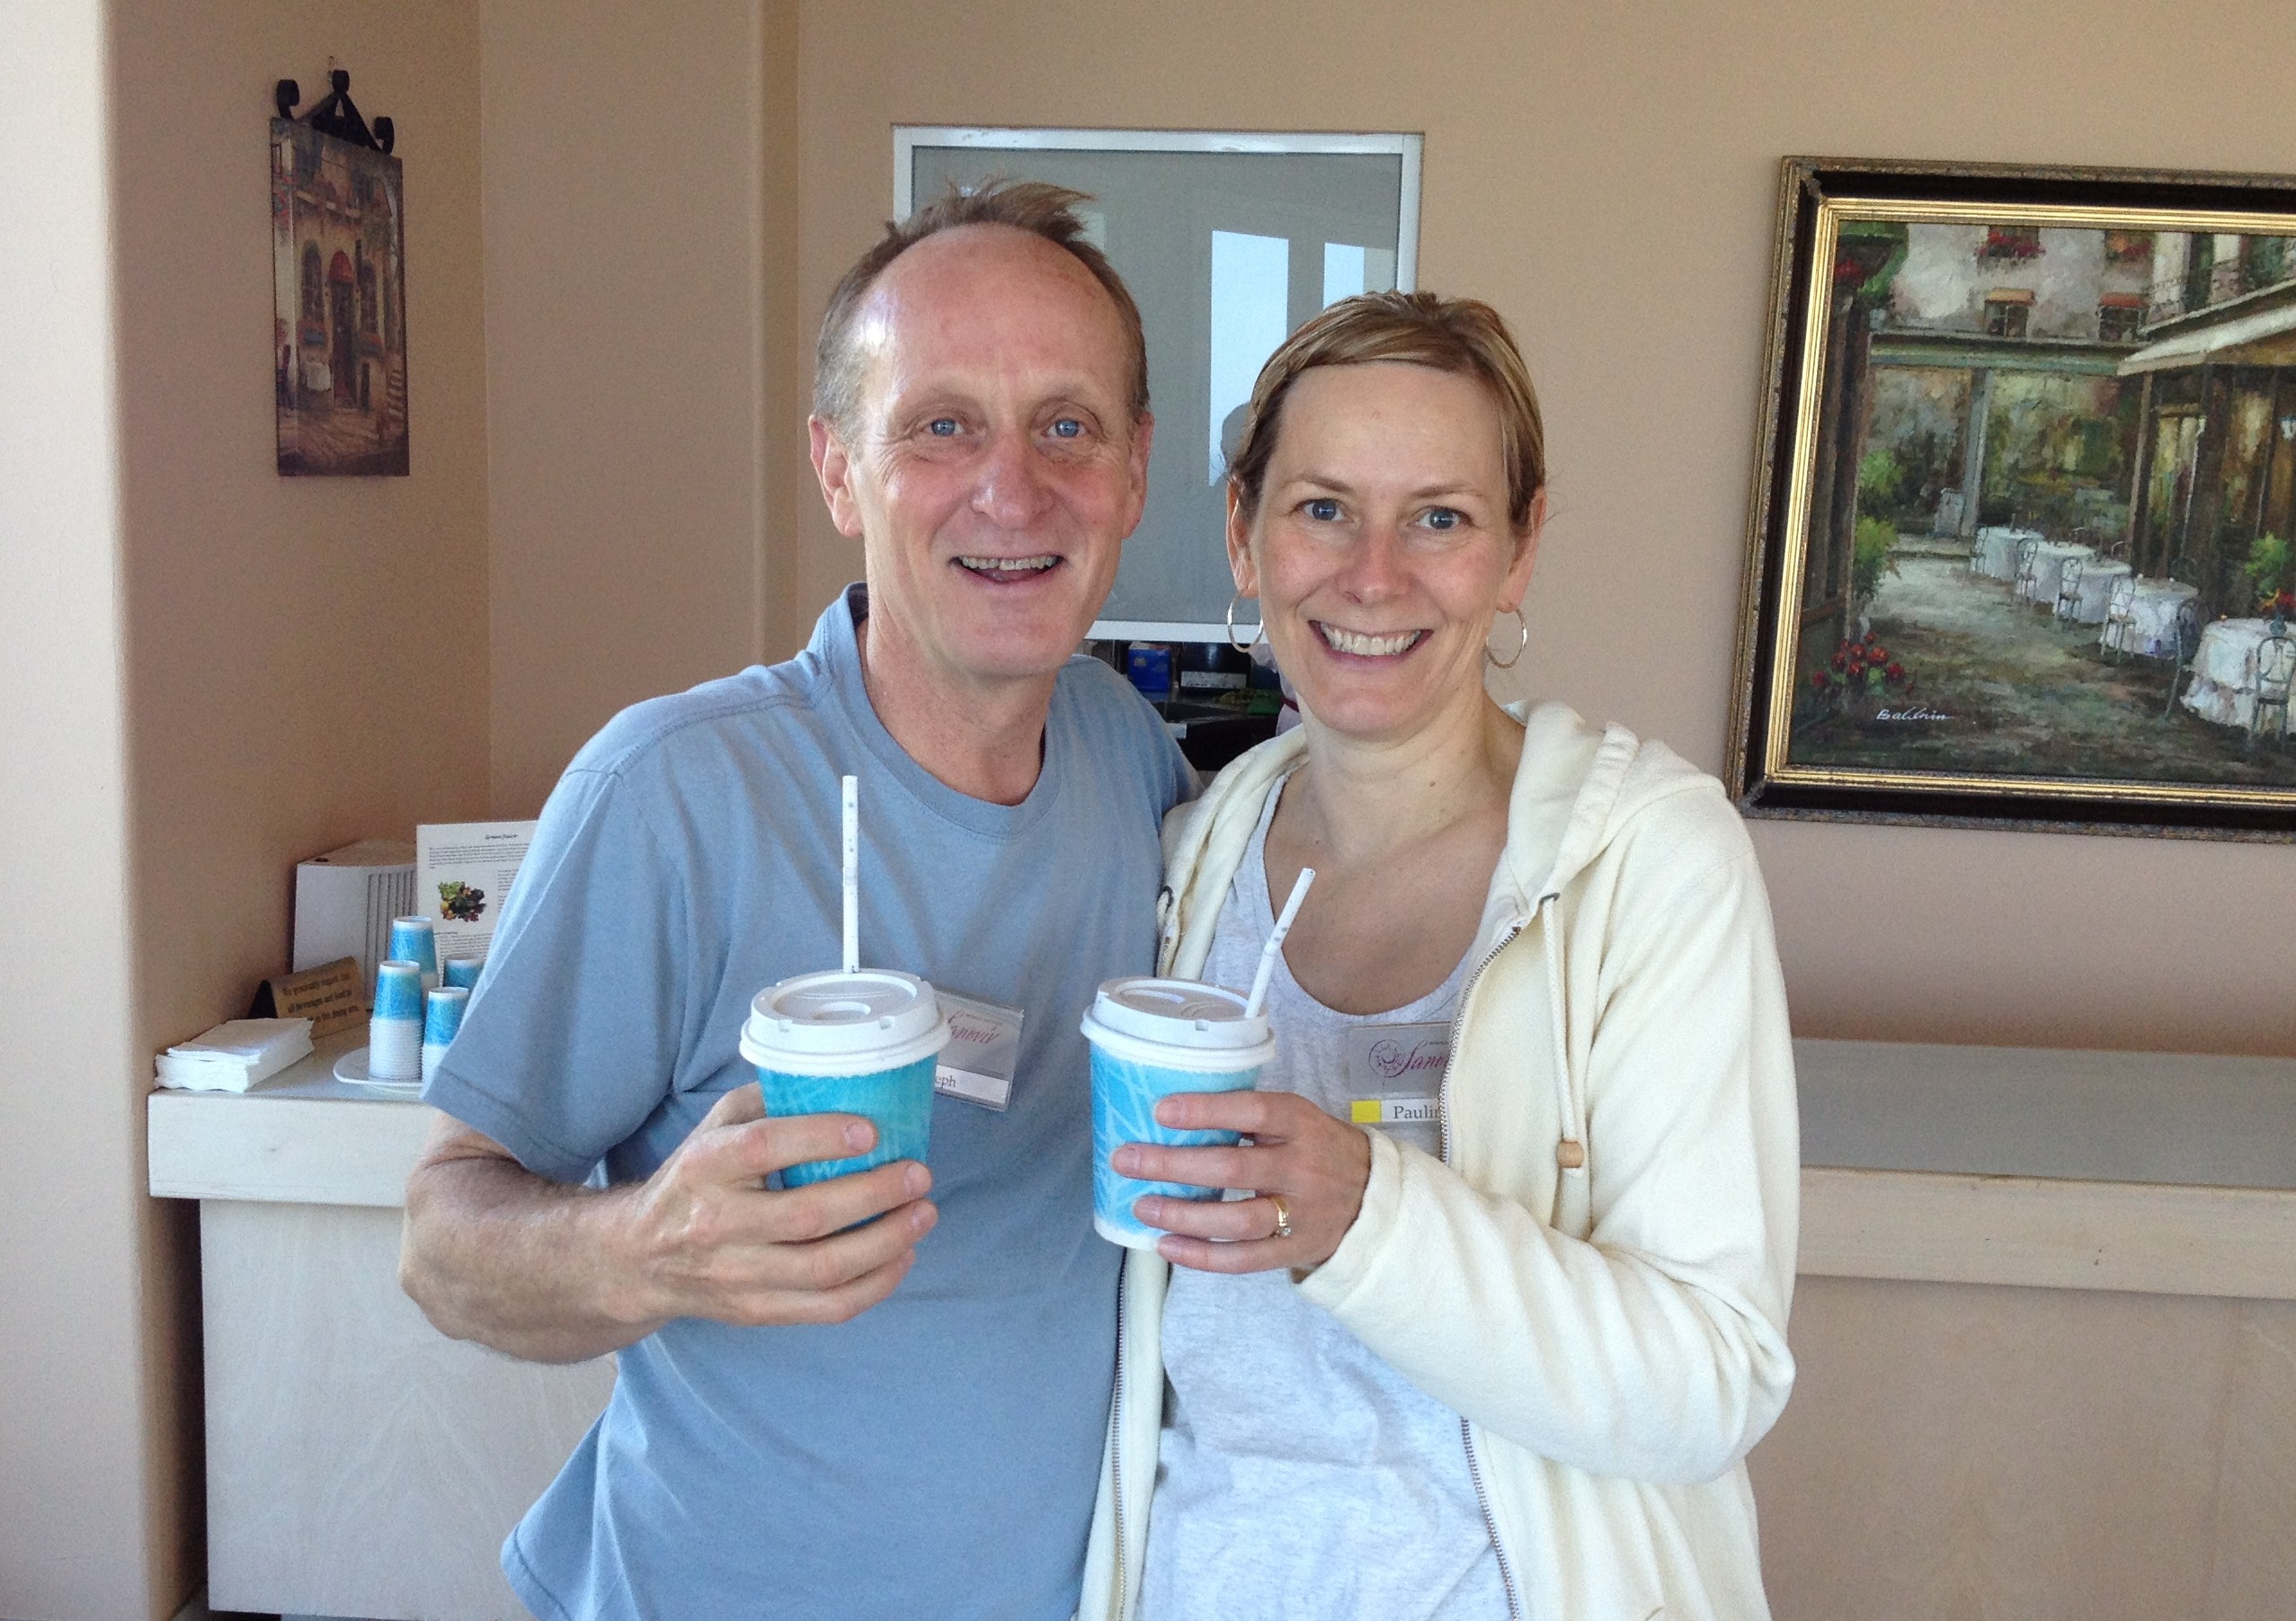 Top male percentage weight-loss winner Joseph Vandervelden and his wife Pauline enjoy a tasty paleo-shake during an all-liquid cleanse day.